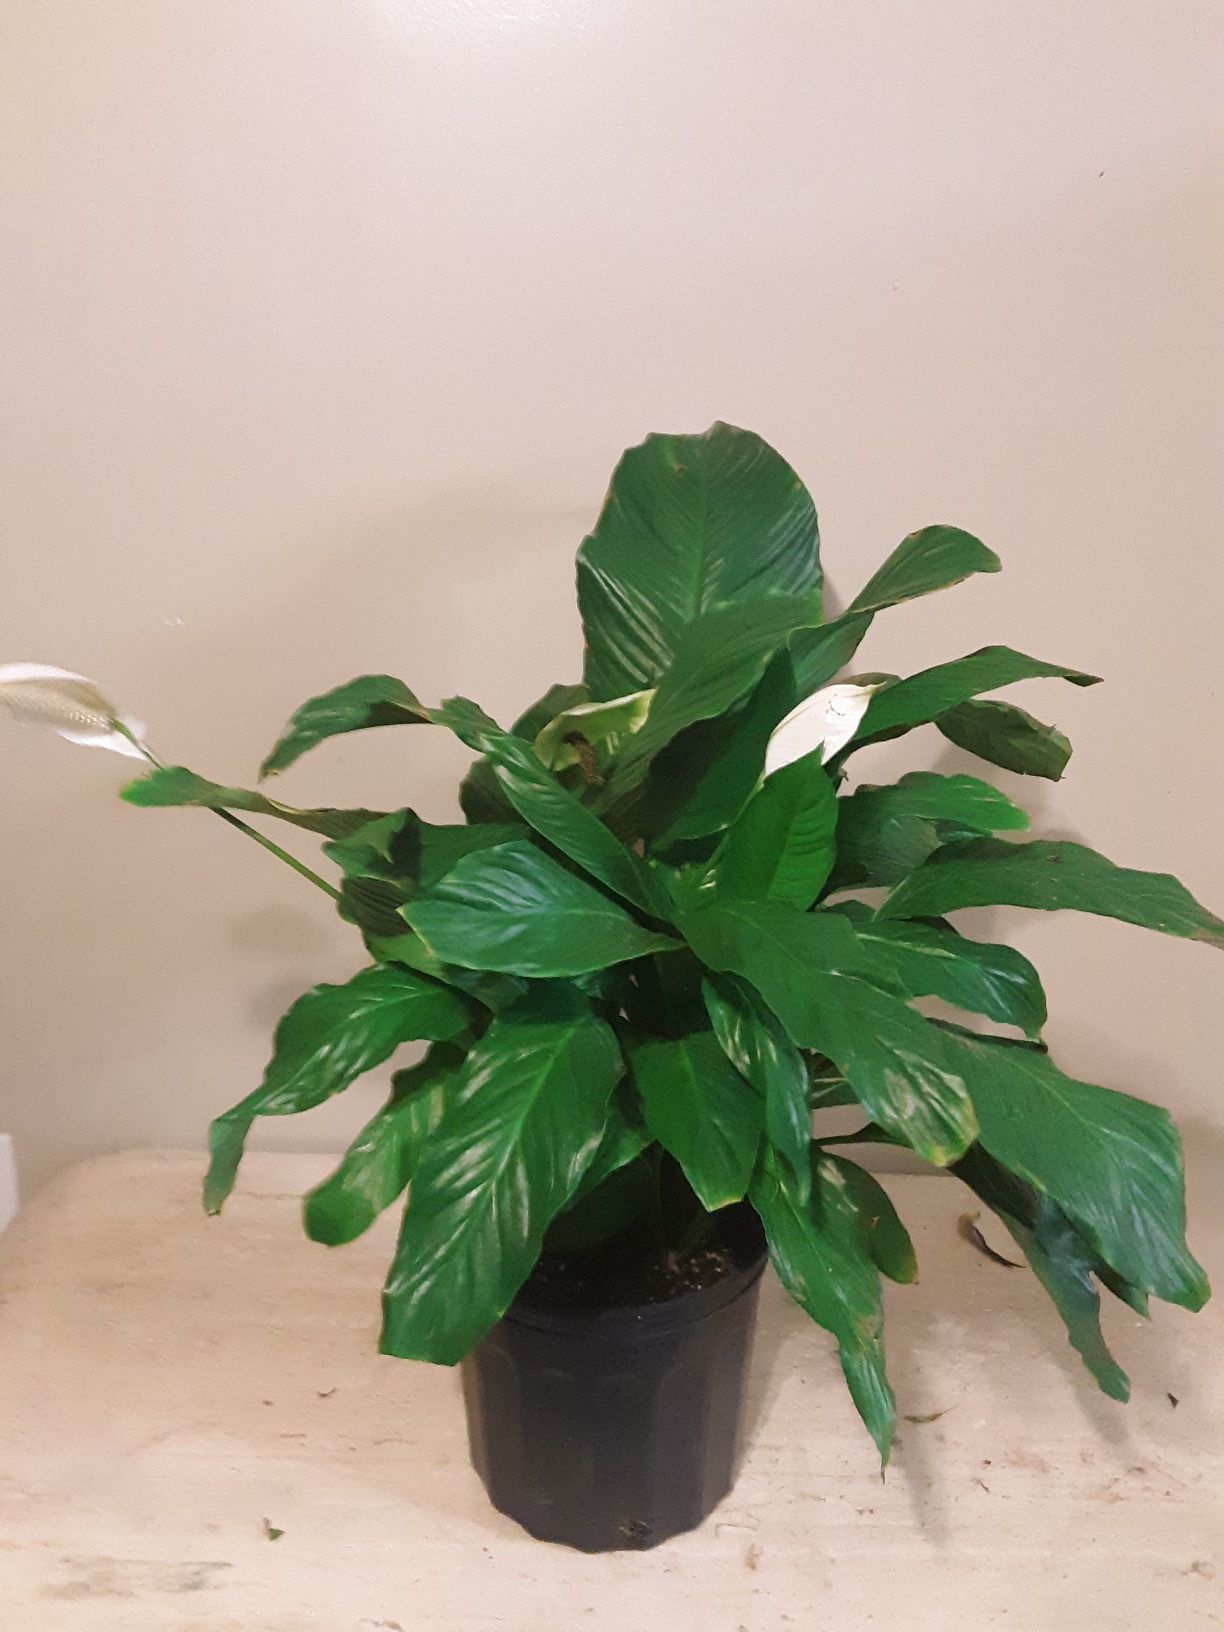 Peace lily plants 3 gallons pot 2ft 4 inches tall